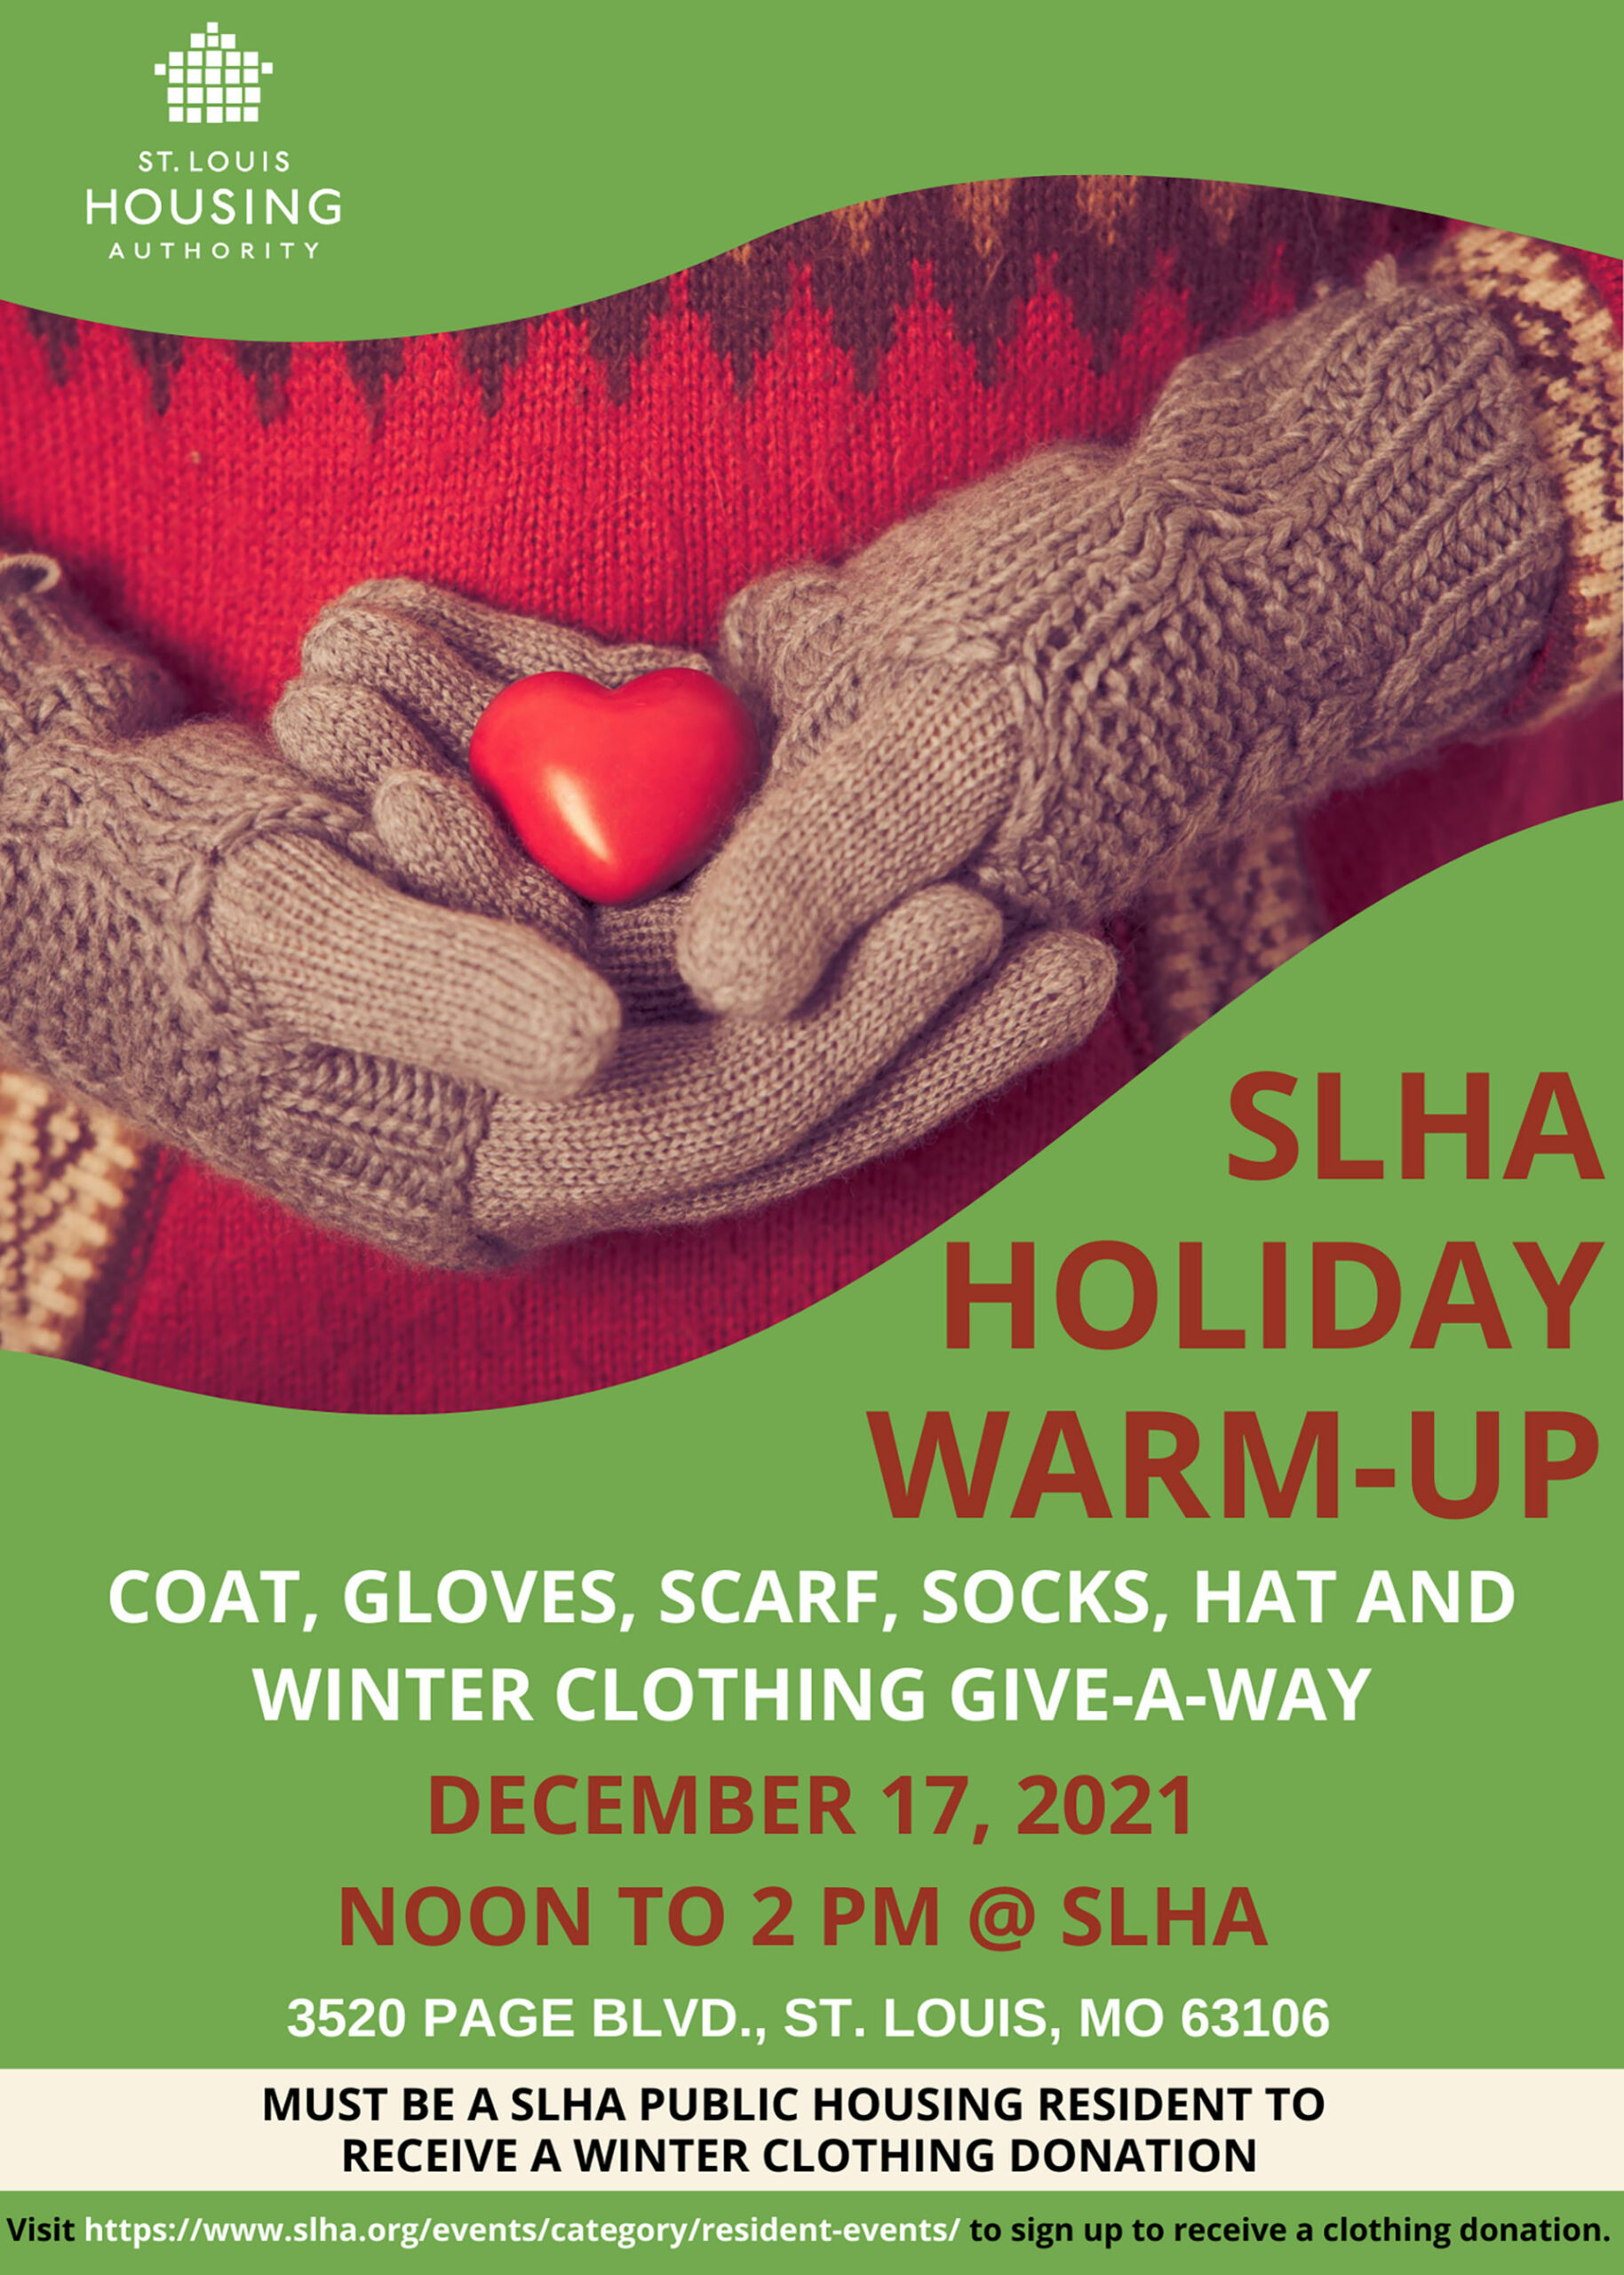 SLHA winter clothing give-a-way resident flyer.